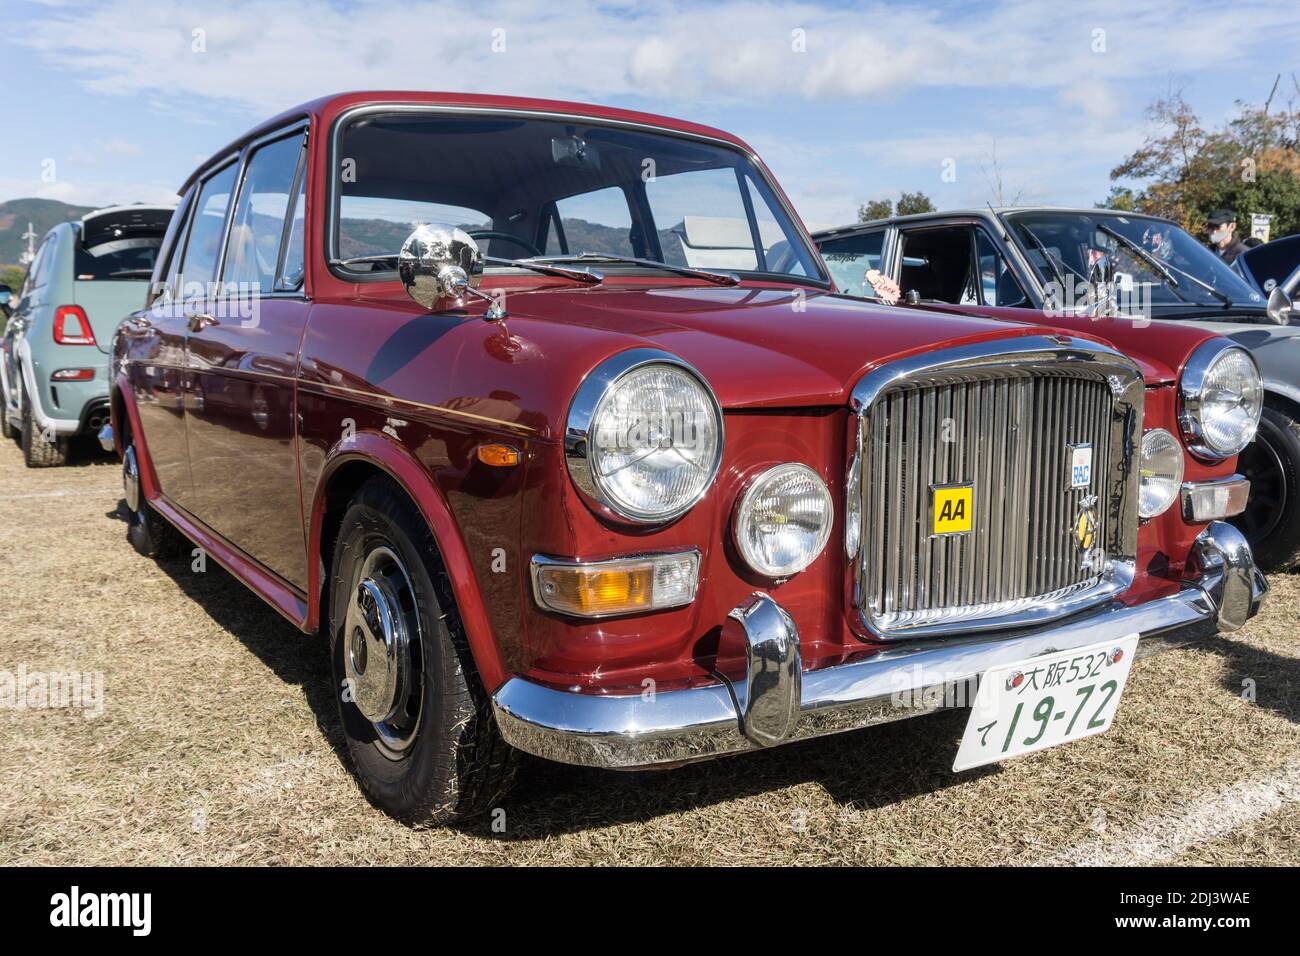 Front view of a maroon Vanden Plas Princess 1100 four-door British saloon car outside in sunshine Stock Photo